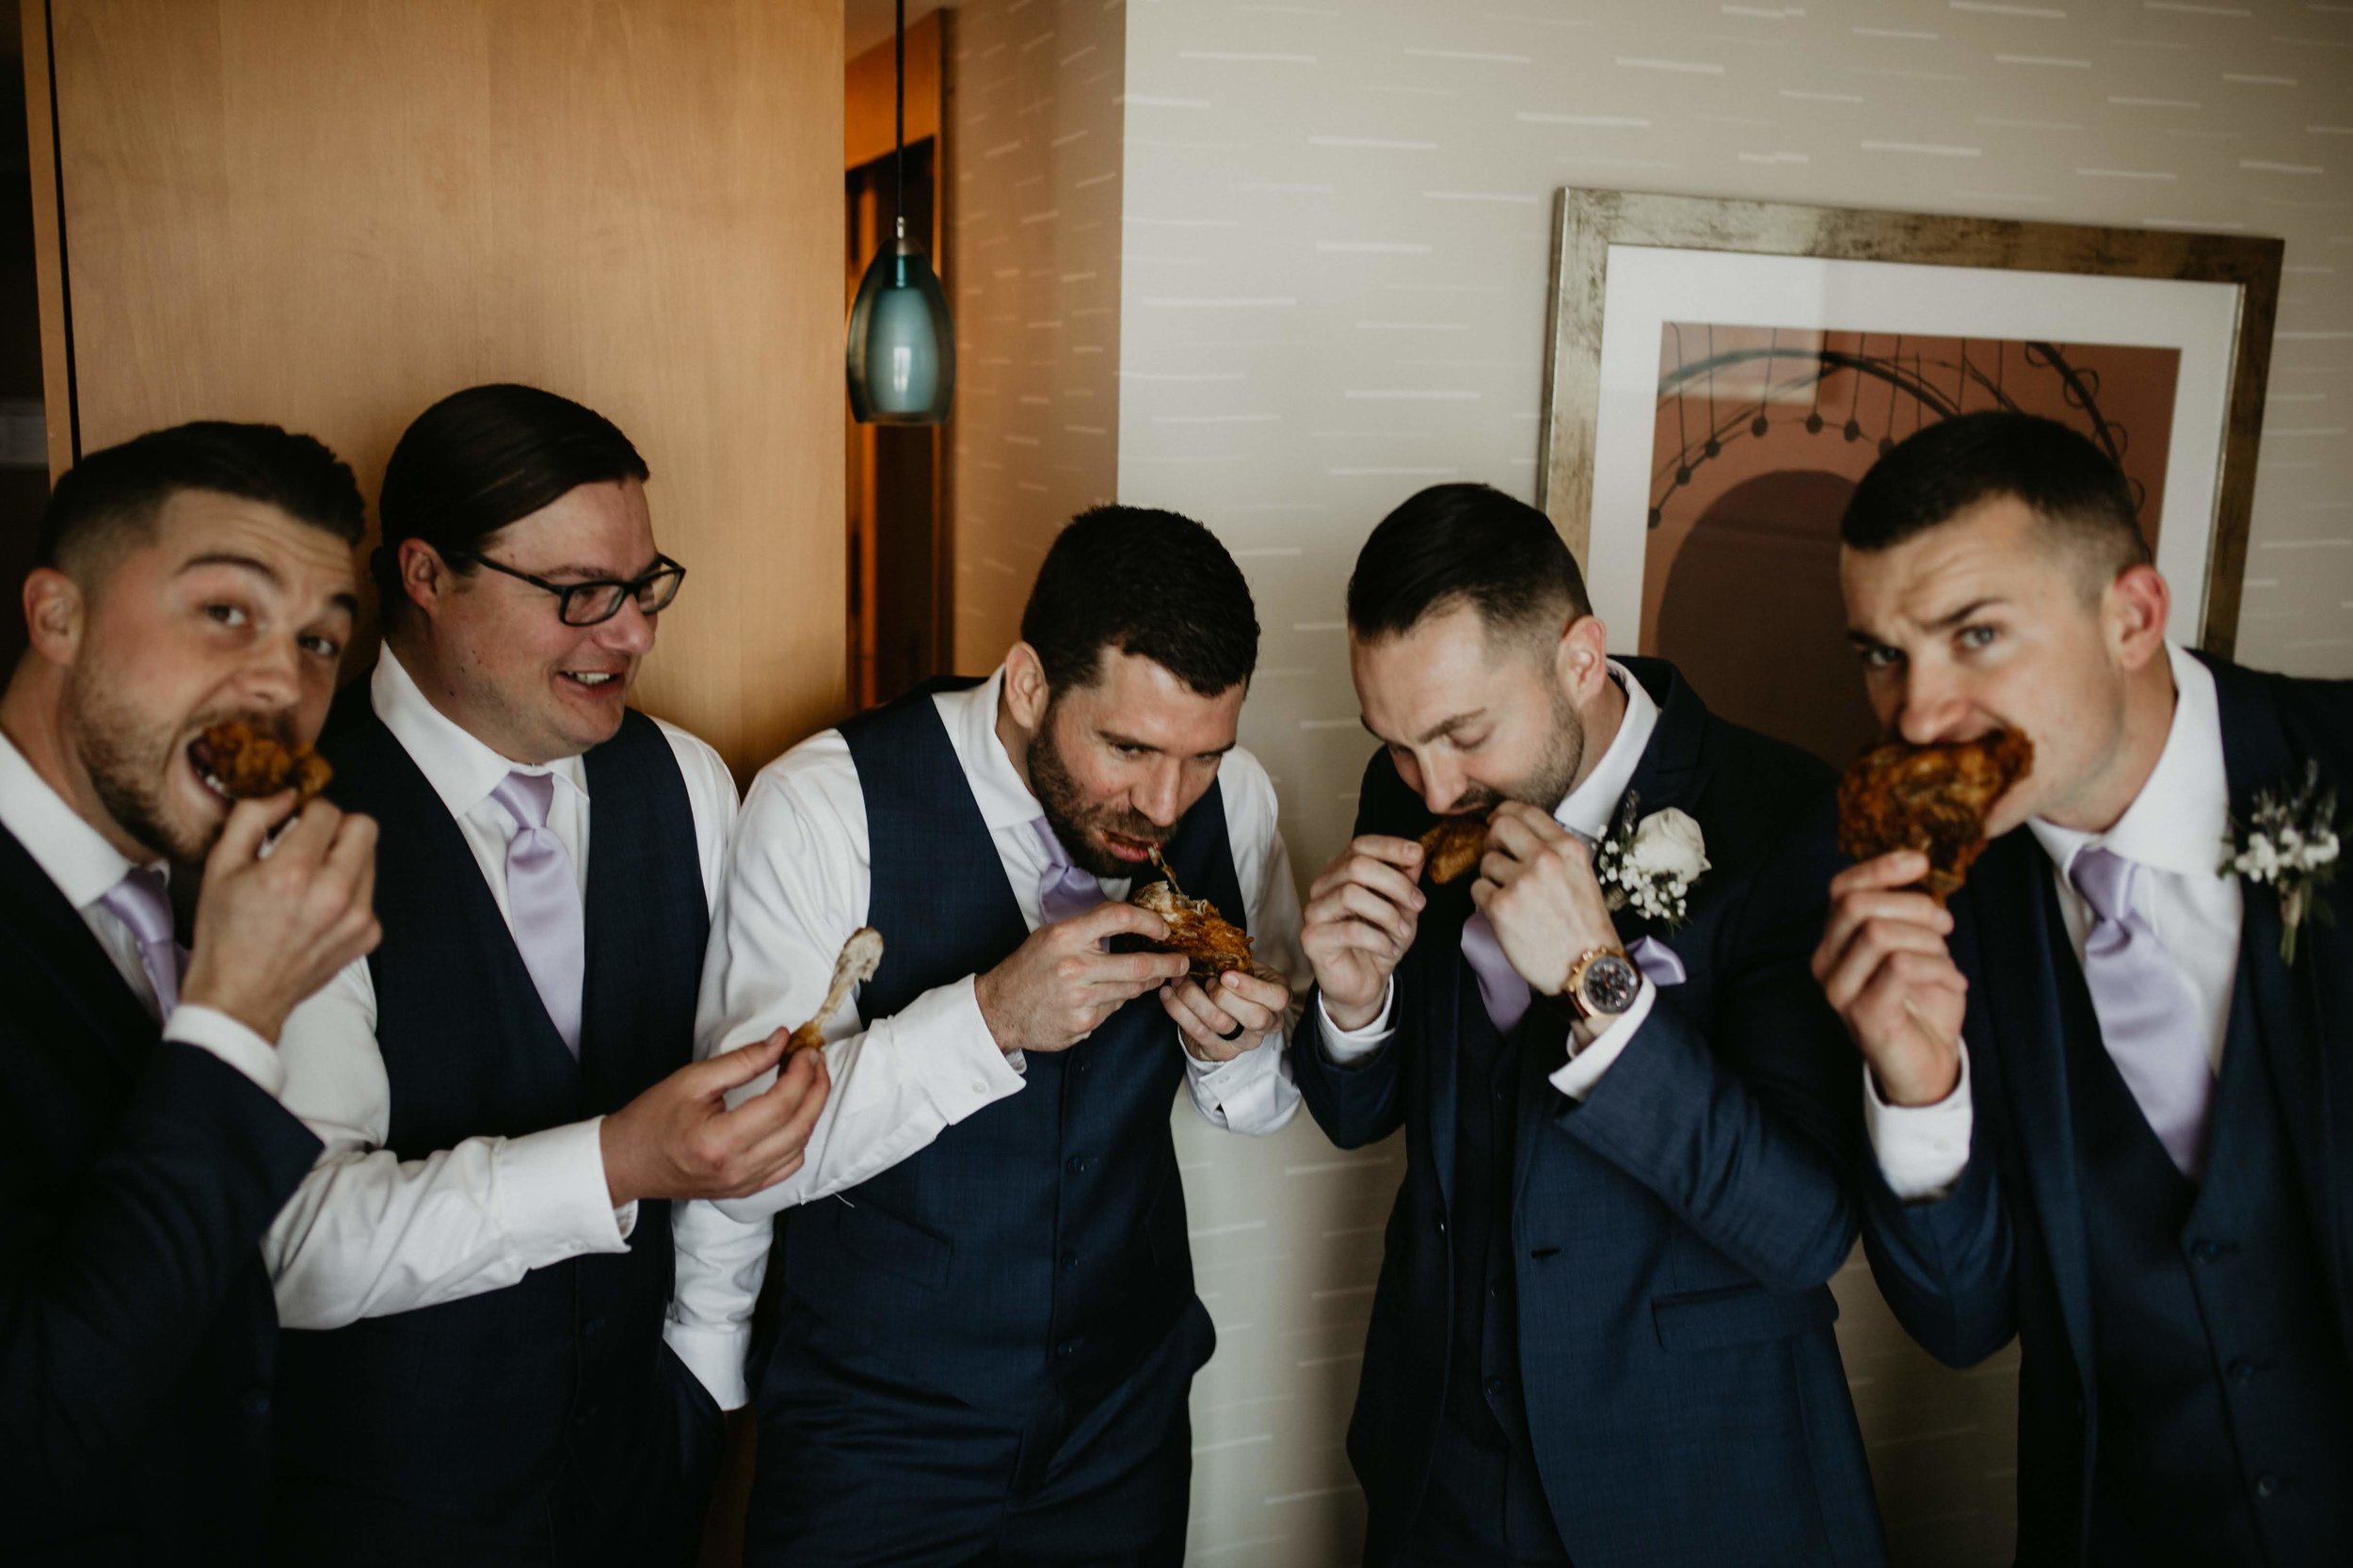 Sustenance is key on your wedding day, probably the most stylish they have ever looked eating wings!